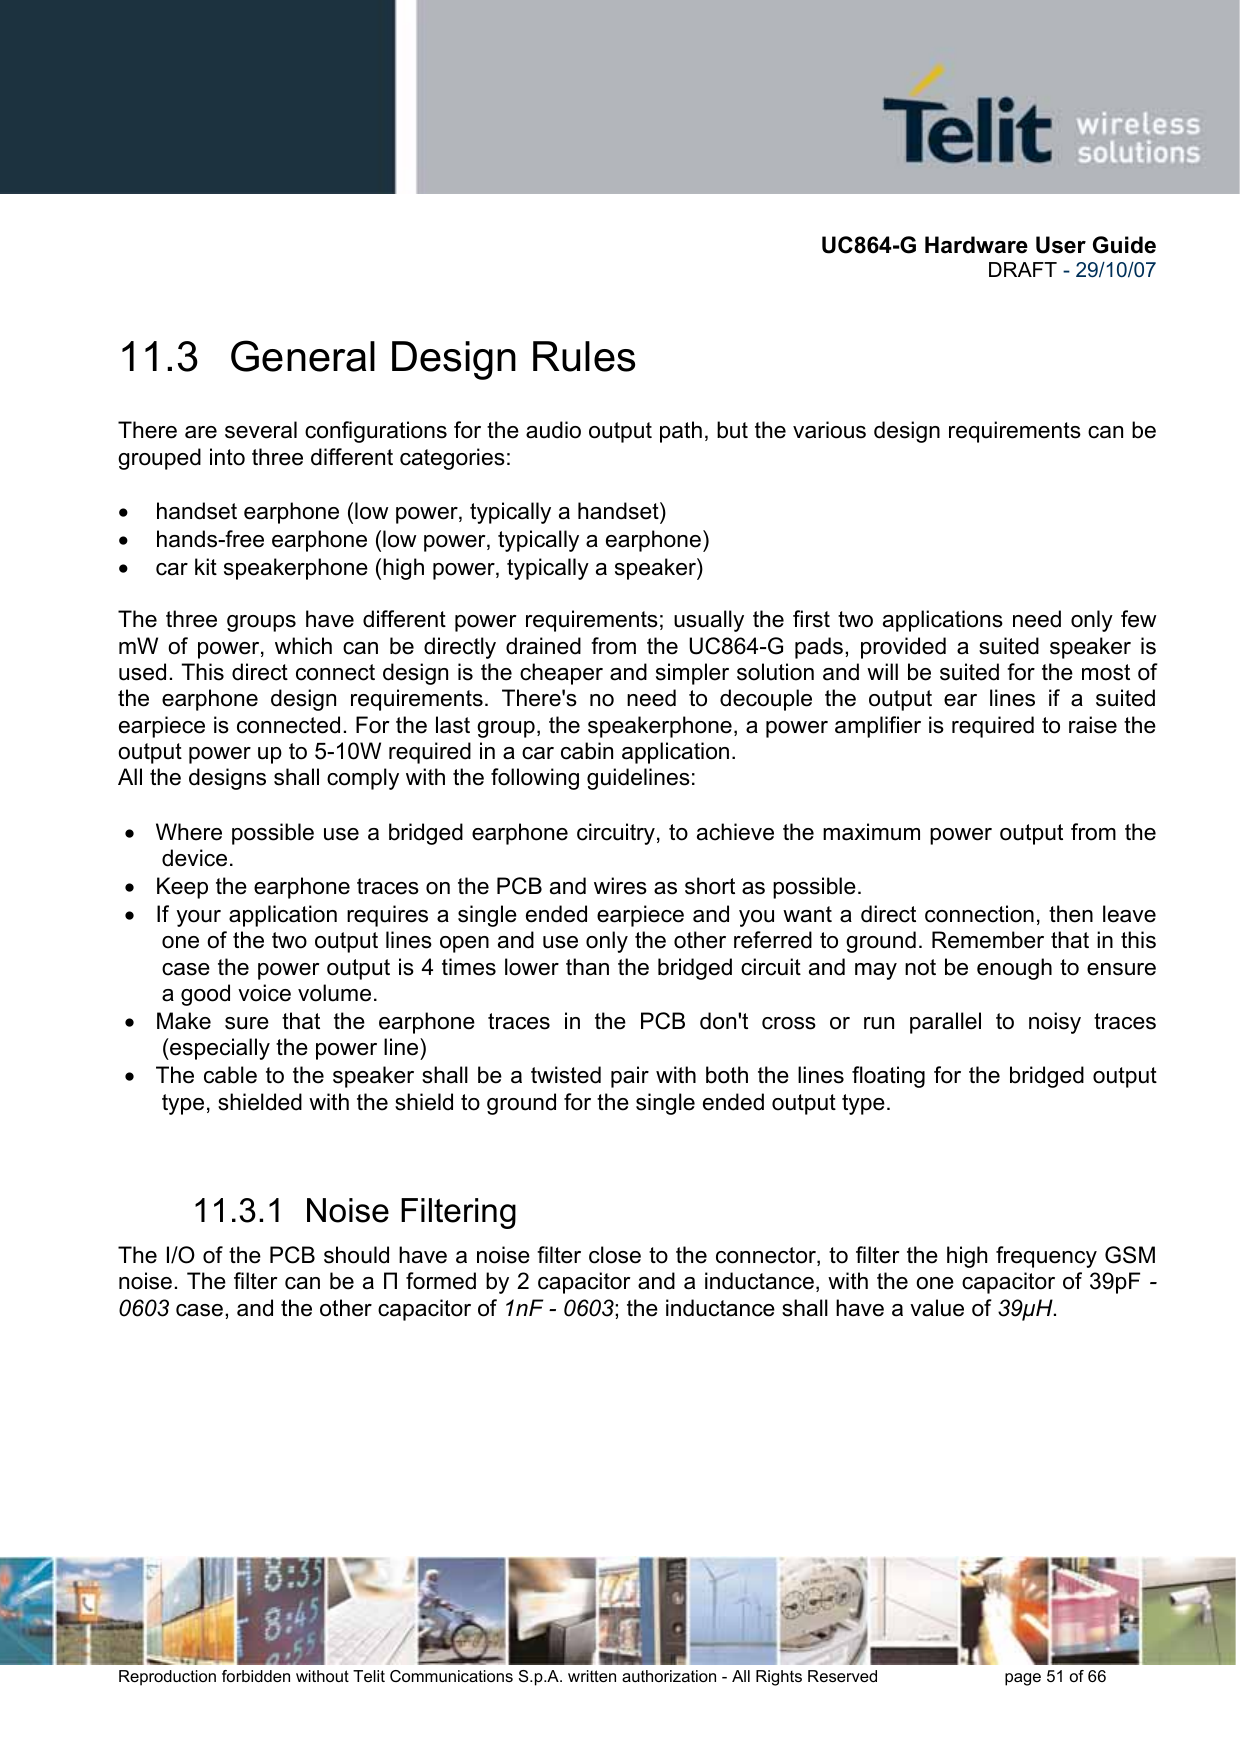       UC864-G Hardware User Guide  DRAFT - 29/10/07      Reproduction forbidden without Telit Communications S.p.A. written authorization - All Rights Reserved    page 51 of 66  11.3   General Design Rules There are several configurations for the audio output path, but the various design requirements can be grouped into three different categories:  •  handset earphone (low power, typically a handset) •  hands-free earphone (low power, typically a earphone) •  car kit speakerphone (high power, typically a speaker)   The three groups have different power requirements; usually the first two applications need only few mW of power, which can be directly drained from the UC864-G pads, provided a suited speaker is used. This direct connect design is the cheaper and simpler solution and will be suited for the most of the earphone design requirements. There&apos;s no need to decouple the output ear lines if a suited earpiece is connected. For the last group, the speakerphone, a power amplifier is required to raise the output power up to 5-10W required in a car cabin application. All the designs shall comply with the following guidelines:  •  Where possible use a bridged earphone circuitry, to achieve the maximum power output from the device. •  Keep the earphone traces on the PCB and wires as short as possible. •  If your application requires a single ended earpiece and you want a direct connection, then leave one of the two output lines open and use only the other referred to ground. Remember that in this case the power output is 4 times lower than the bridged circuit and may not be enough to ensure a good voice volume.  •  Make sure that the earphone traces in the PCB don&apos;t cross or run parallel to noisy traces (especially the power line)  •  The cable to the speaker shall be a twisted pair with both the lines floating for the bridged output type, shielded with the shield to ground for the single ended output type.  11.3.1  Noise Filtering The I/O of the PCB should have a noise filter close to the connector, to filter the high frequency GSM noise. The filter can be a Π formed by 2 capacitor and a inductance, with the one capacitor of 39pF - 0603 case, and the other capacitor of 1nF - 0603; the inductance shall have a value of 39µH. 